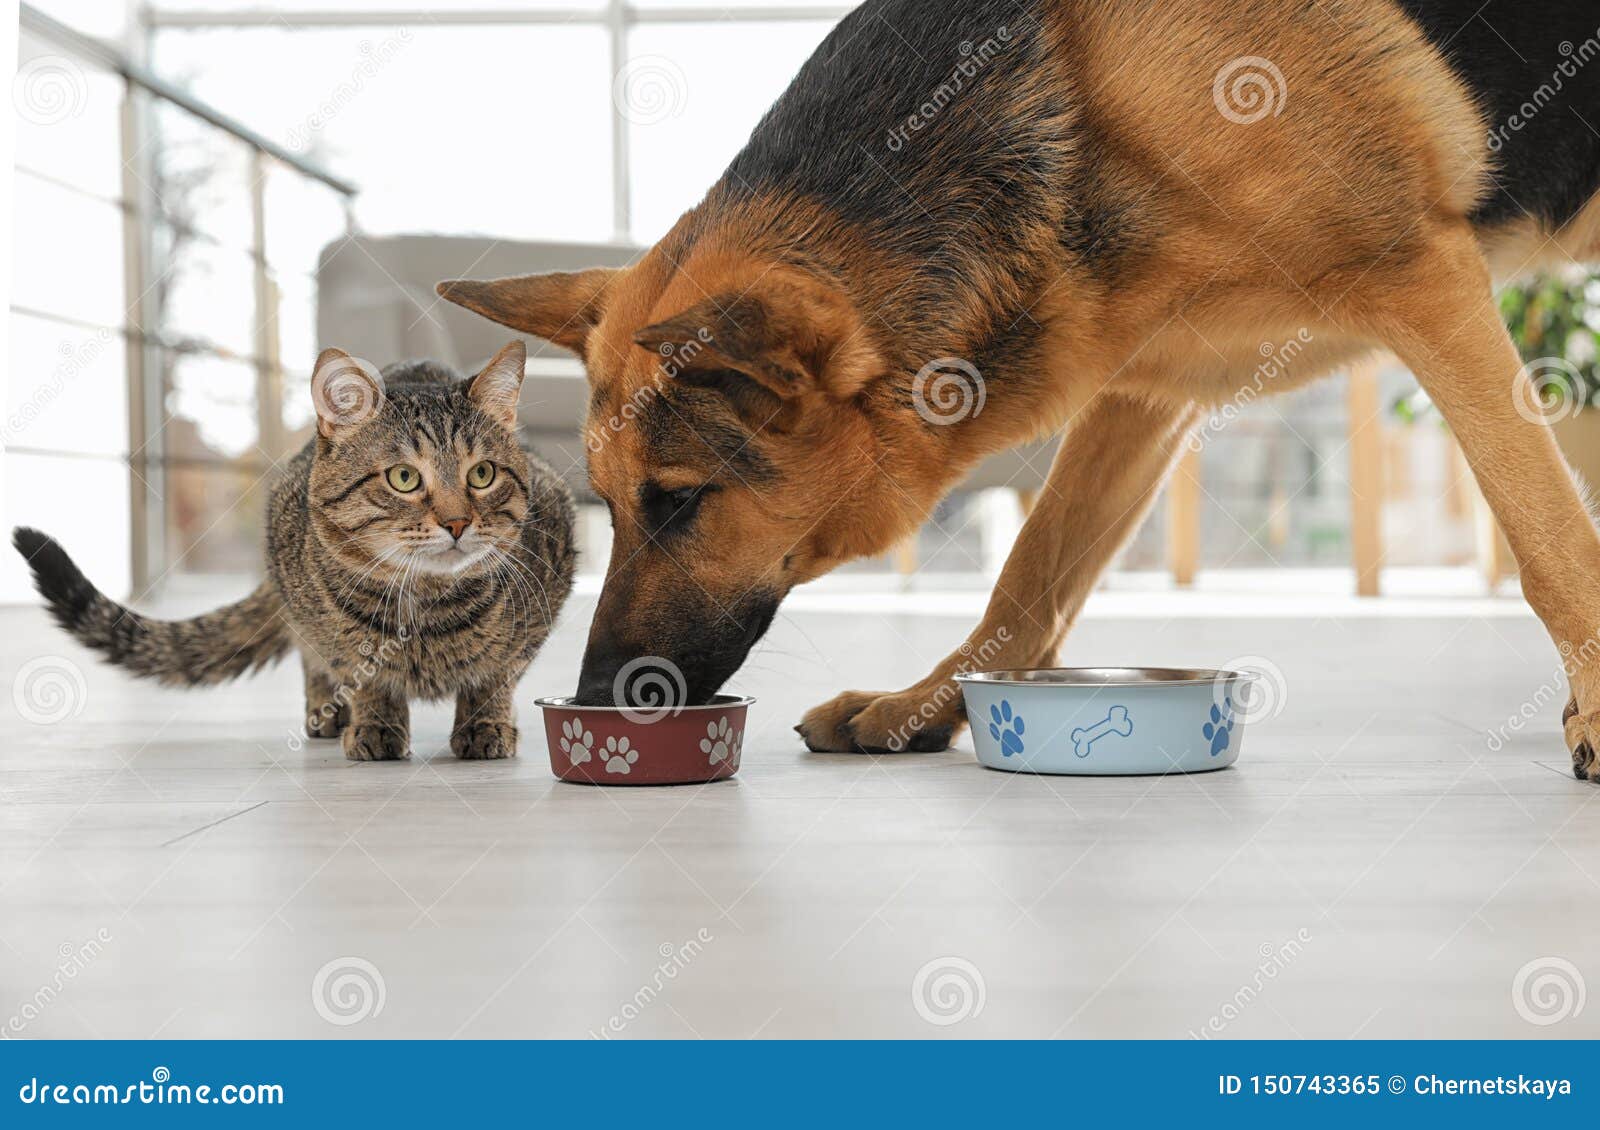 dog stealing food from cat`s bowl on floor indoors